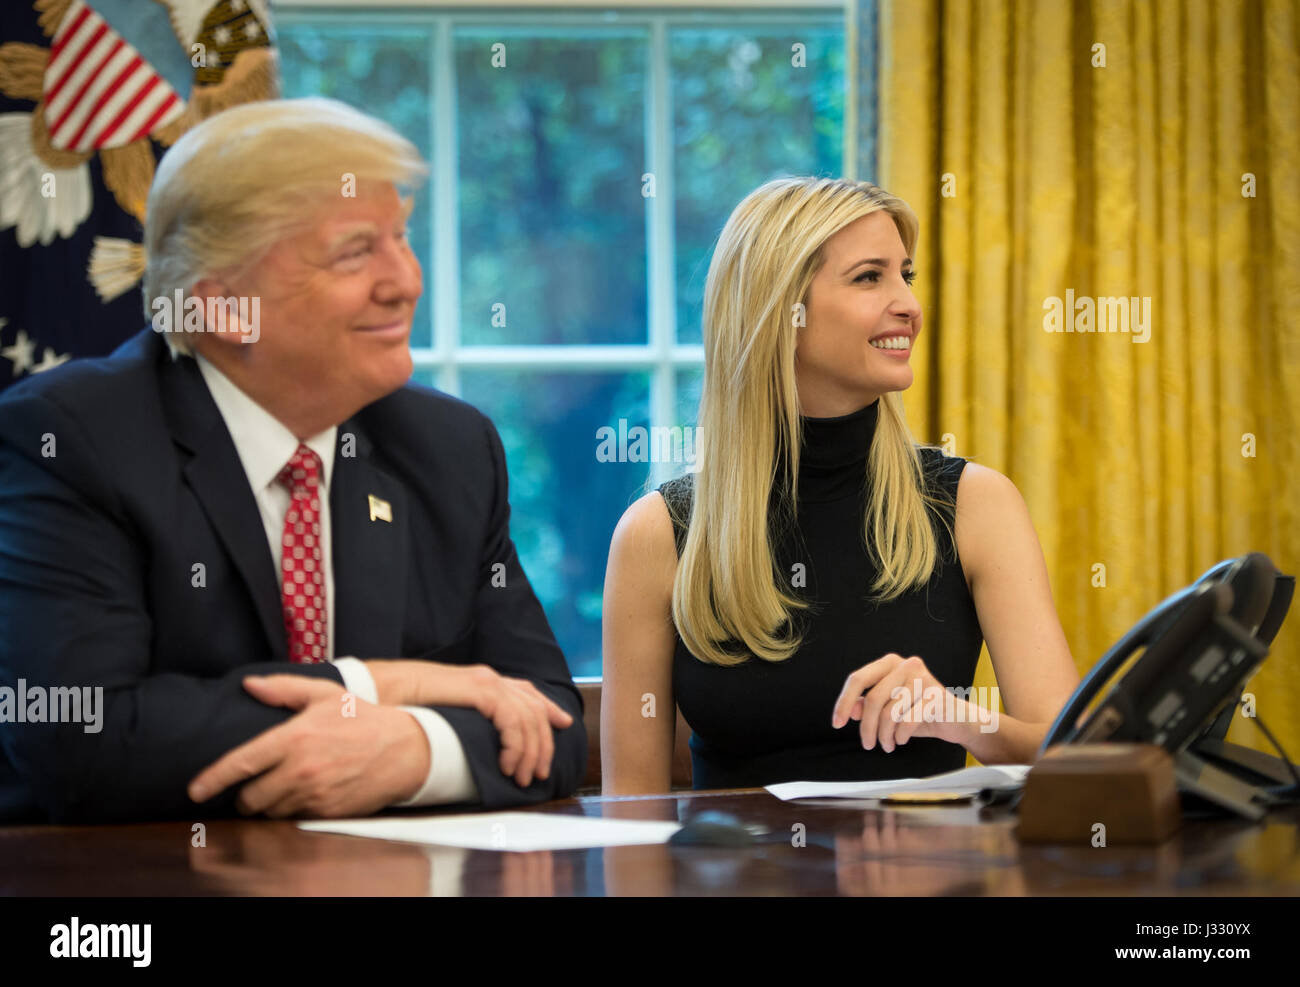 President Donald Trump, joined by First Daughter Ivanka Trump talks with NASA astronauts Peggy Whitson and Jack Fischer onboard the International Space Station Monday, April 24, 2017 from the Oval Office of the White House in Washington. The President congratulated Whitson for breaking the record for cumulative time spent in space by a U.S. astronaut. The President and First Daughter were also joined by NASA astronaut Kate Rubins and discussed with the three astronauts what it is like to live and work on the orbiting outpost as well as the importance of STEM.  Photo Credit: (NASA/Bill Ingalls) Stock Photo